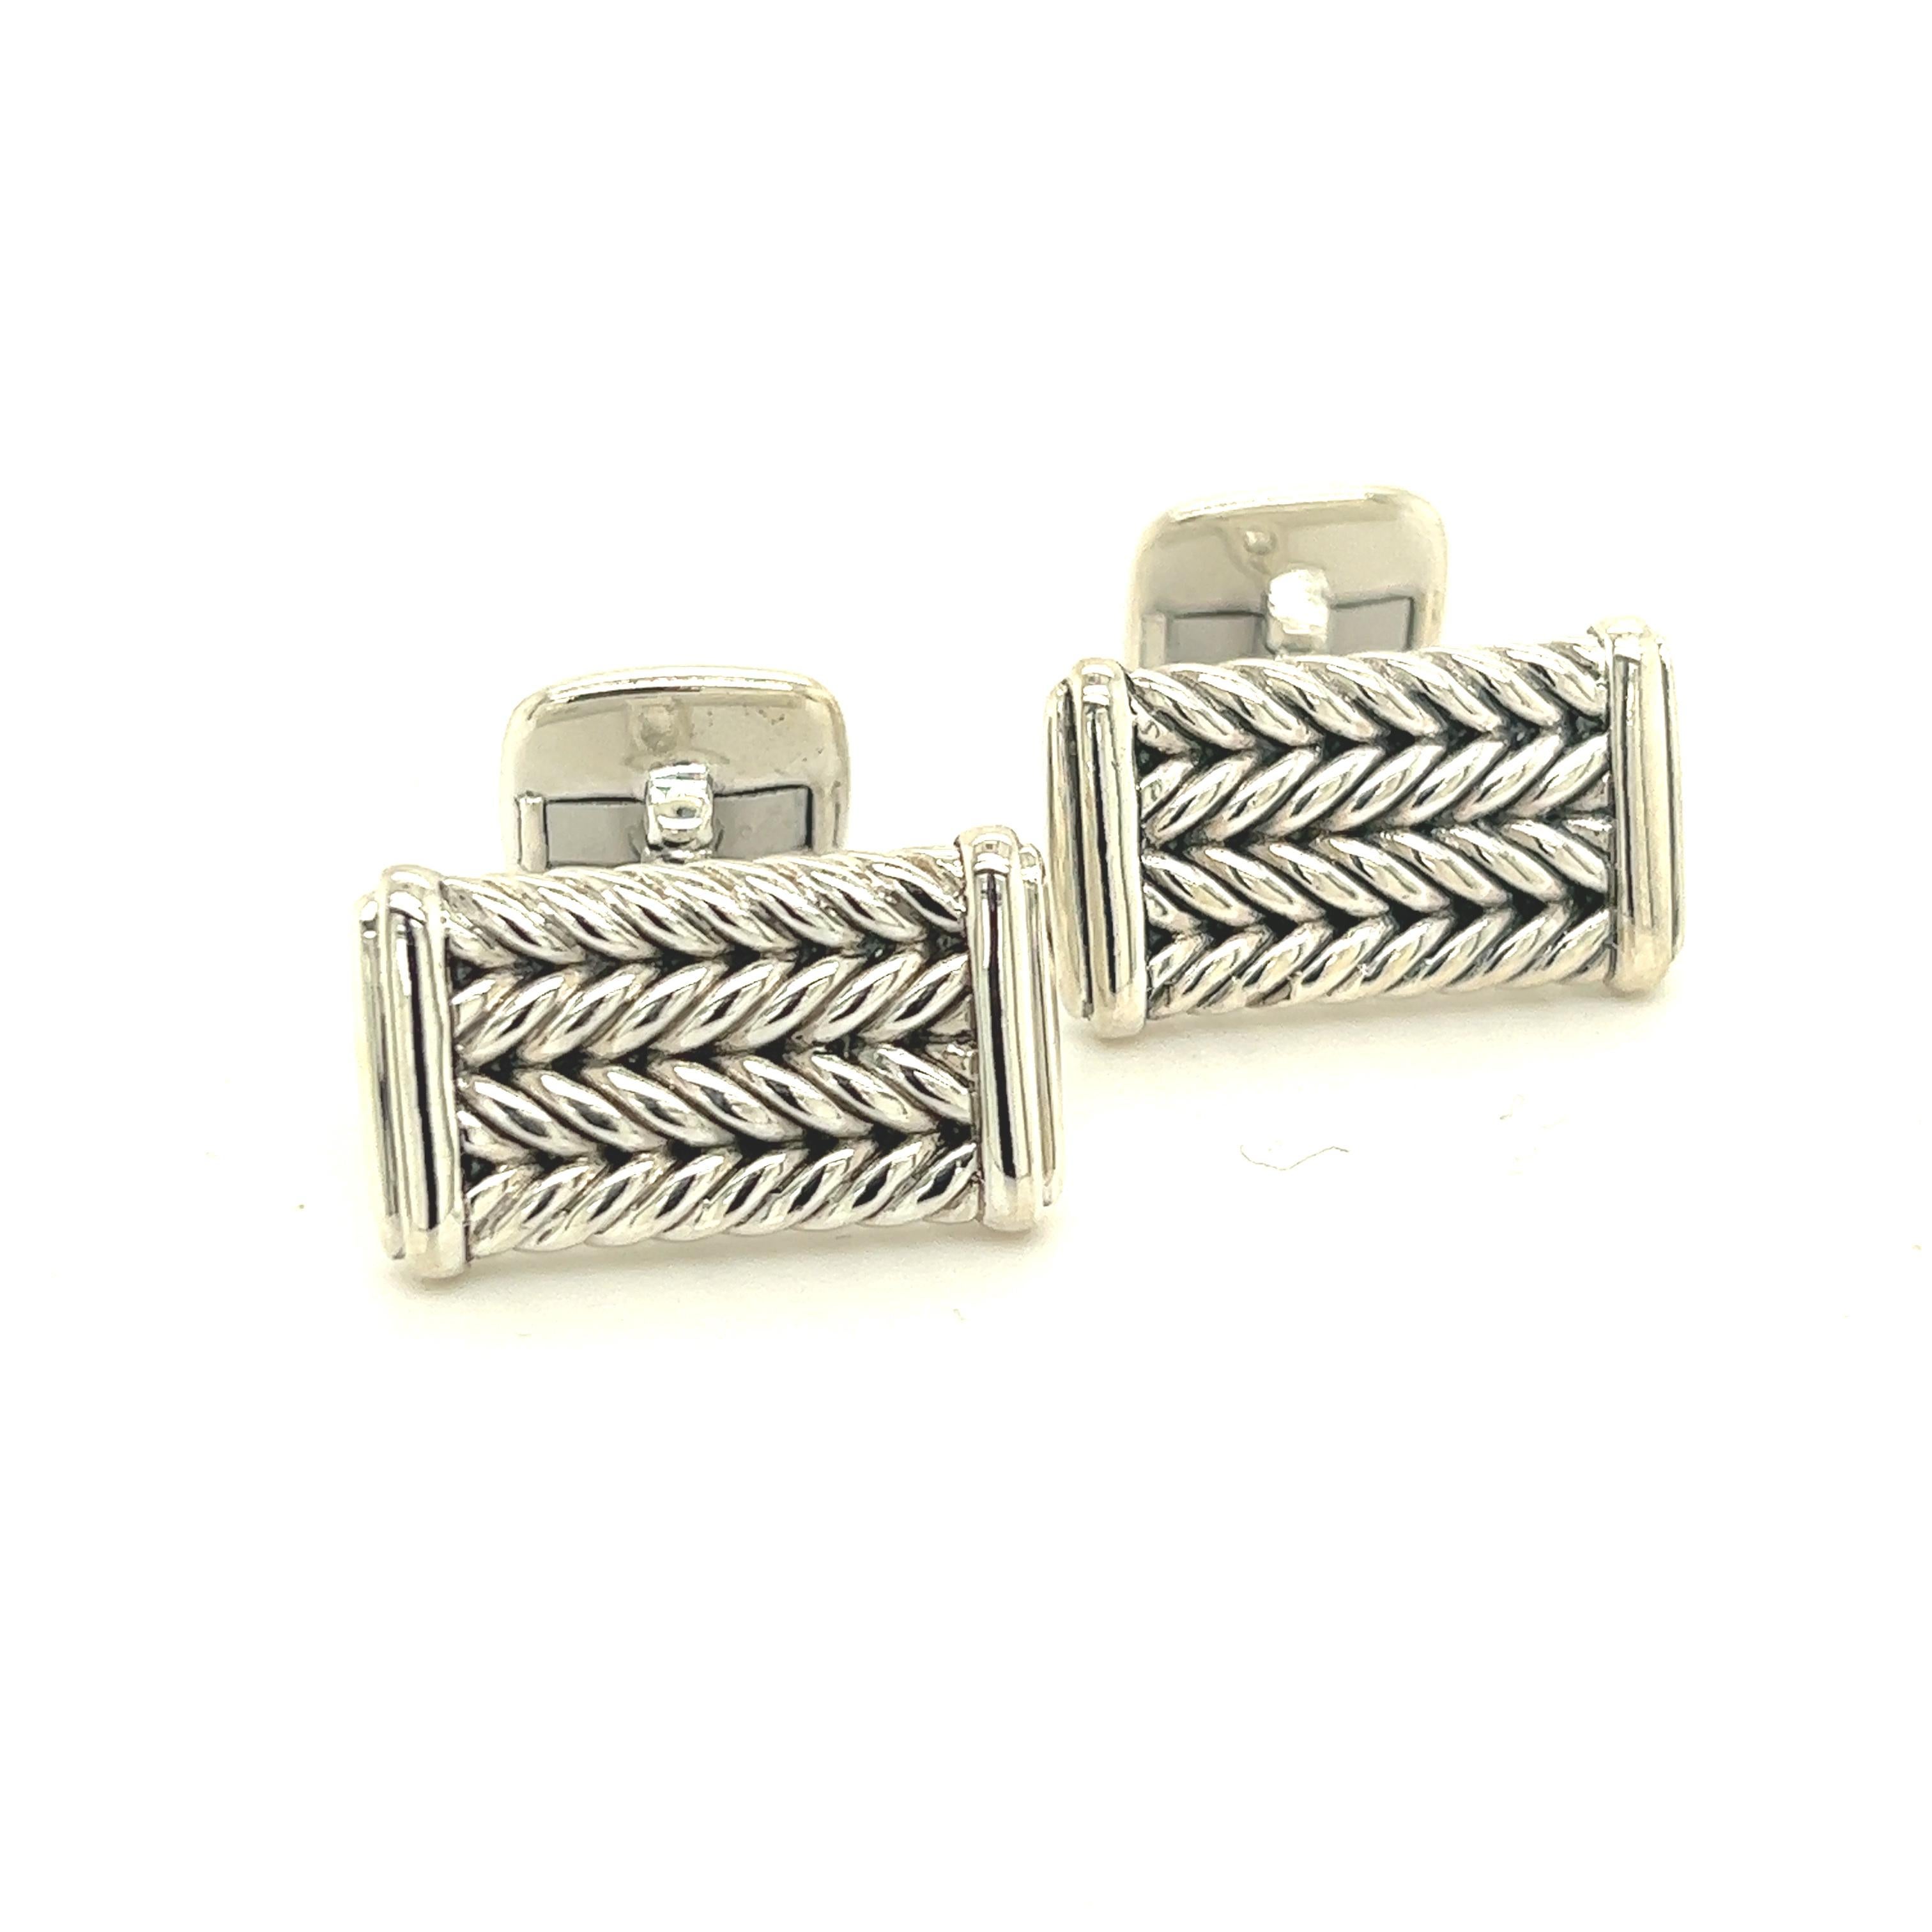 David Yurman Estate Mens Cufflinks Sterling Silver In Good Condition For Sale In Brooklyn, NY